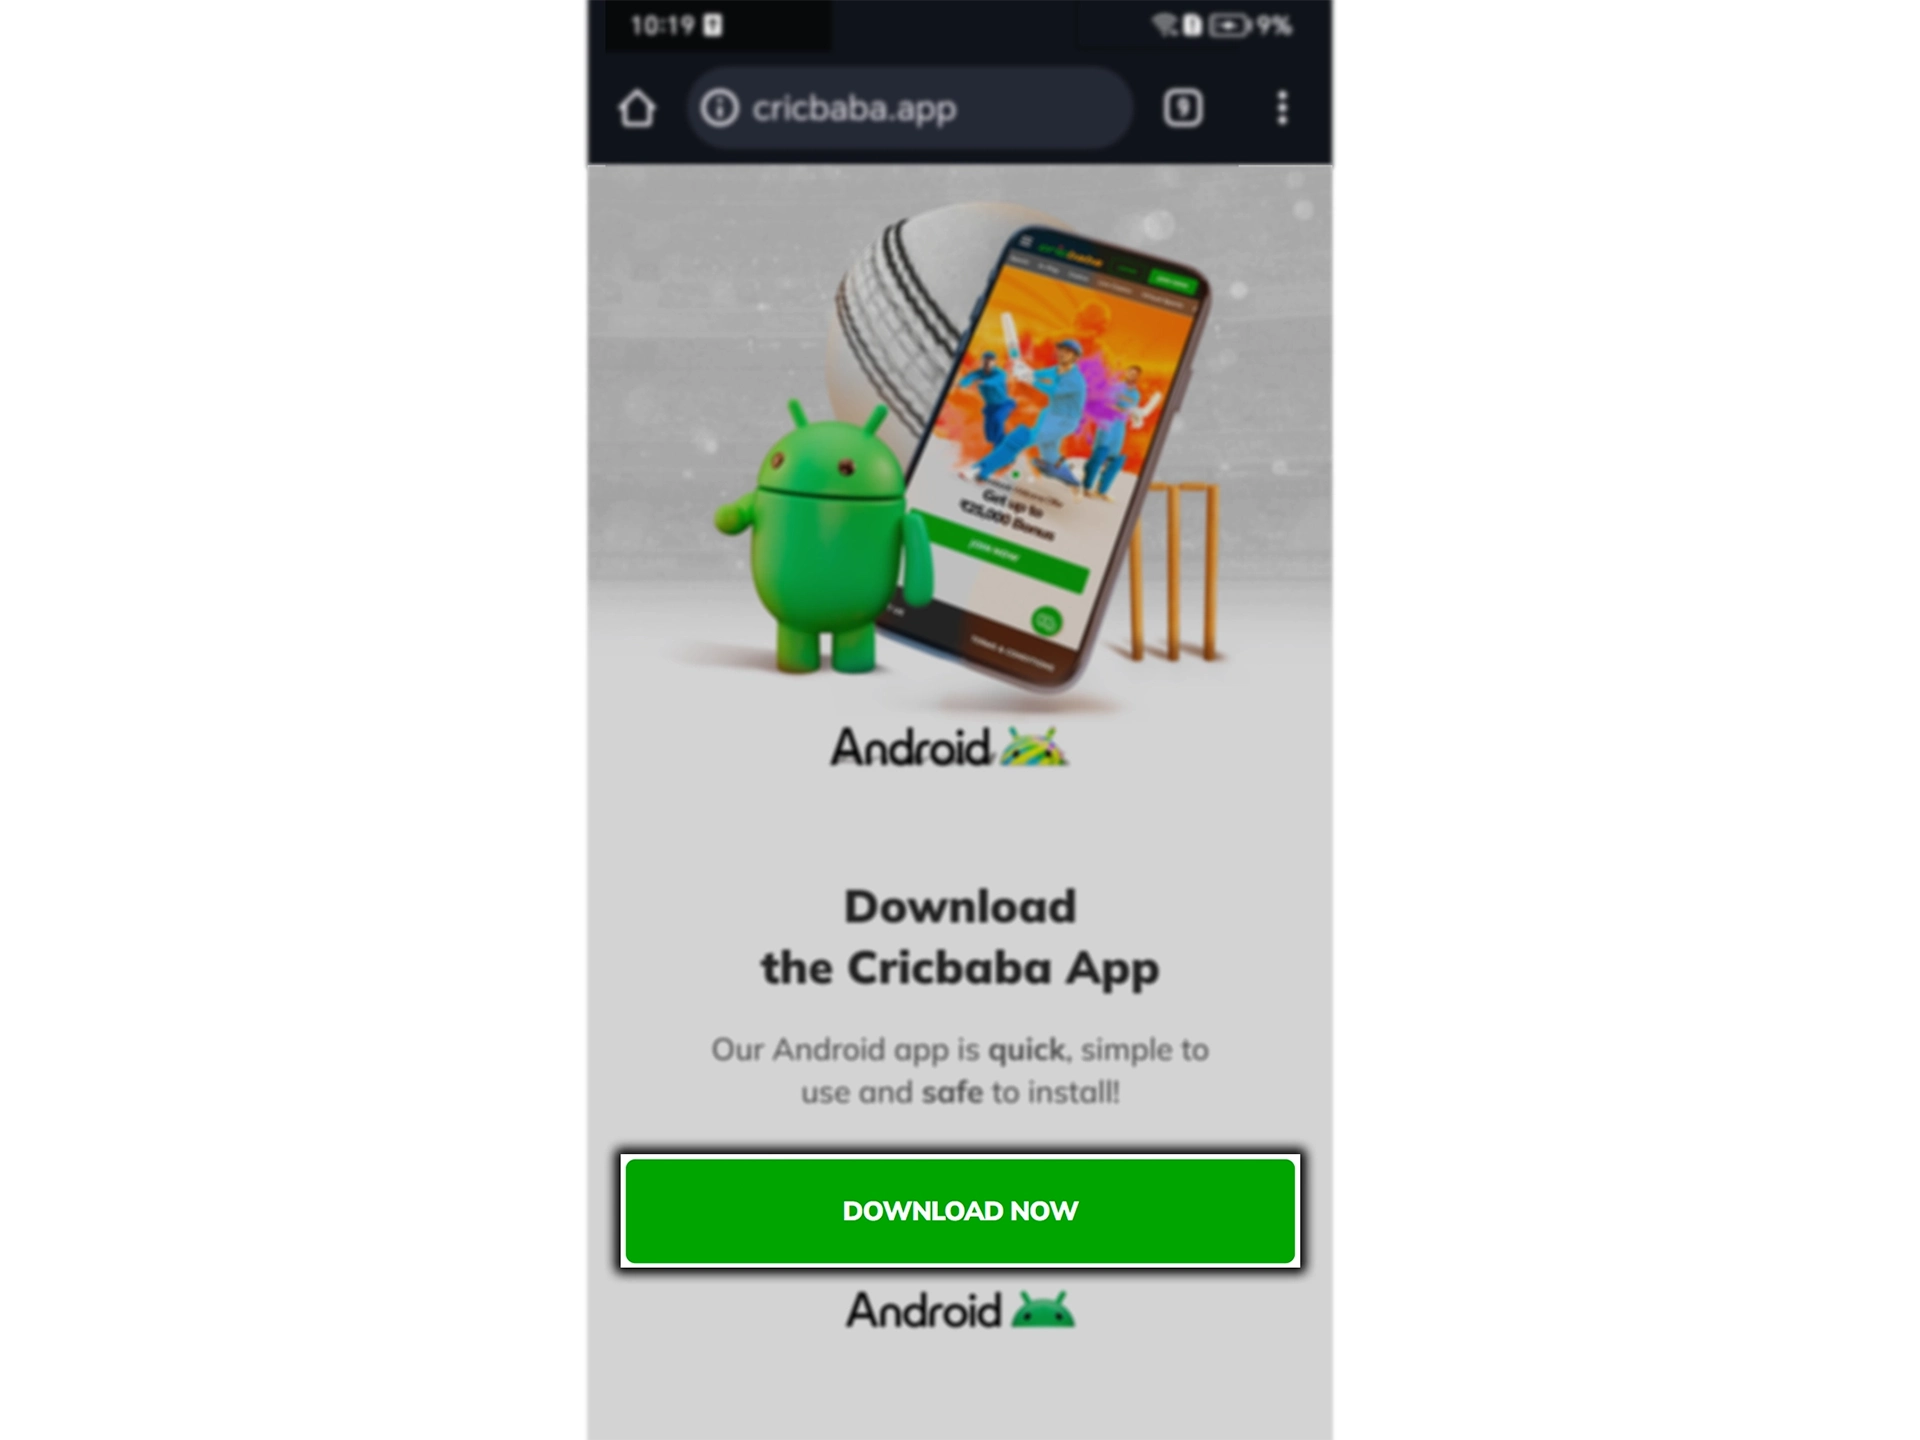 Download the installation file of the Cricbaba application.